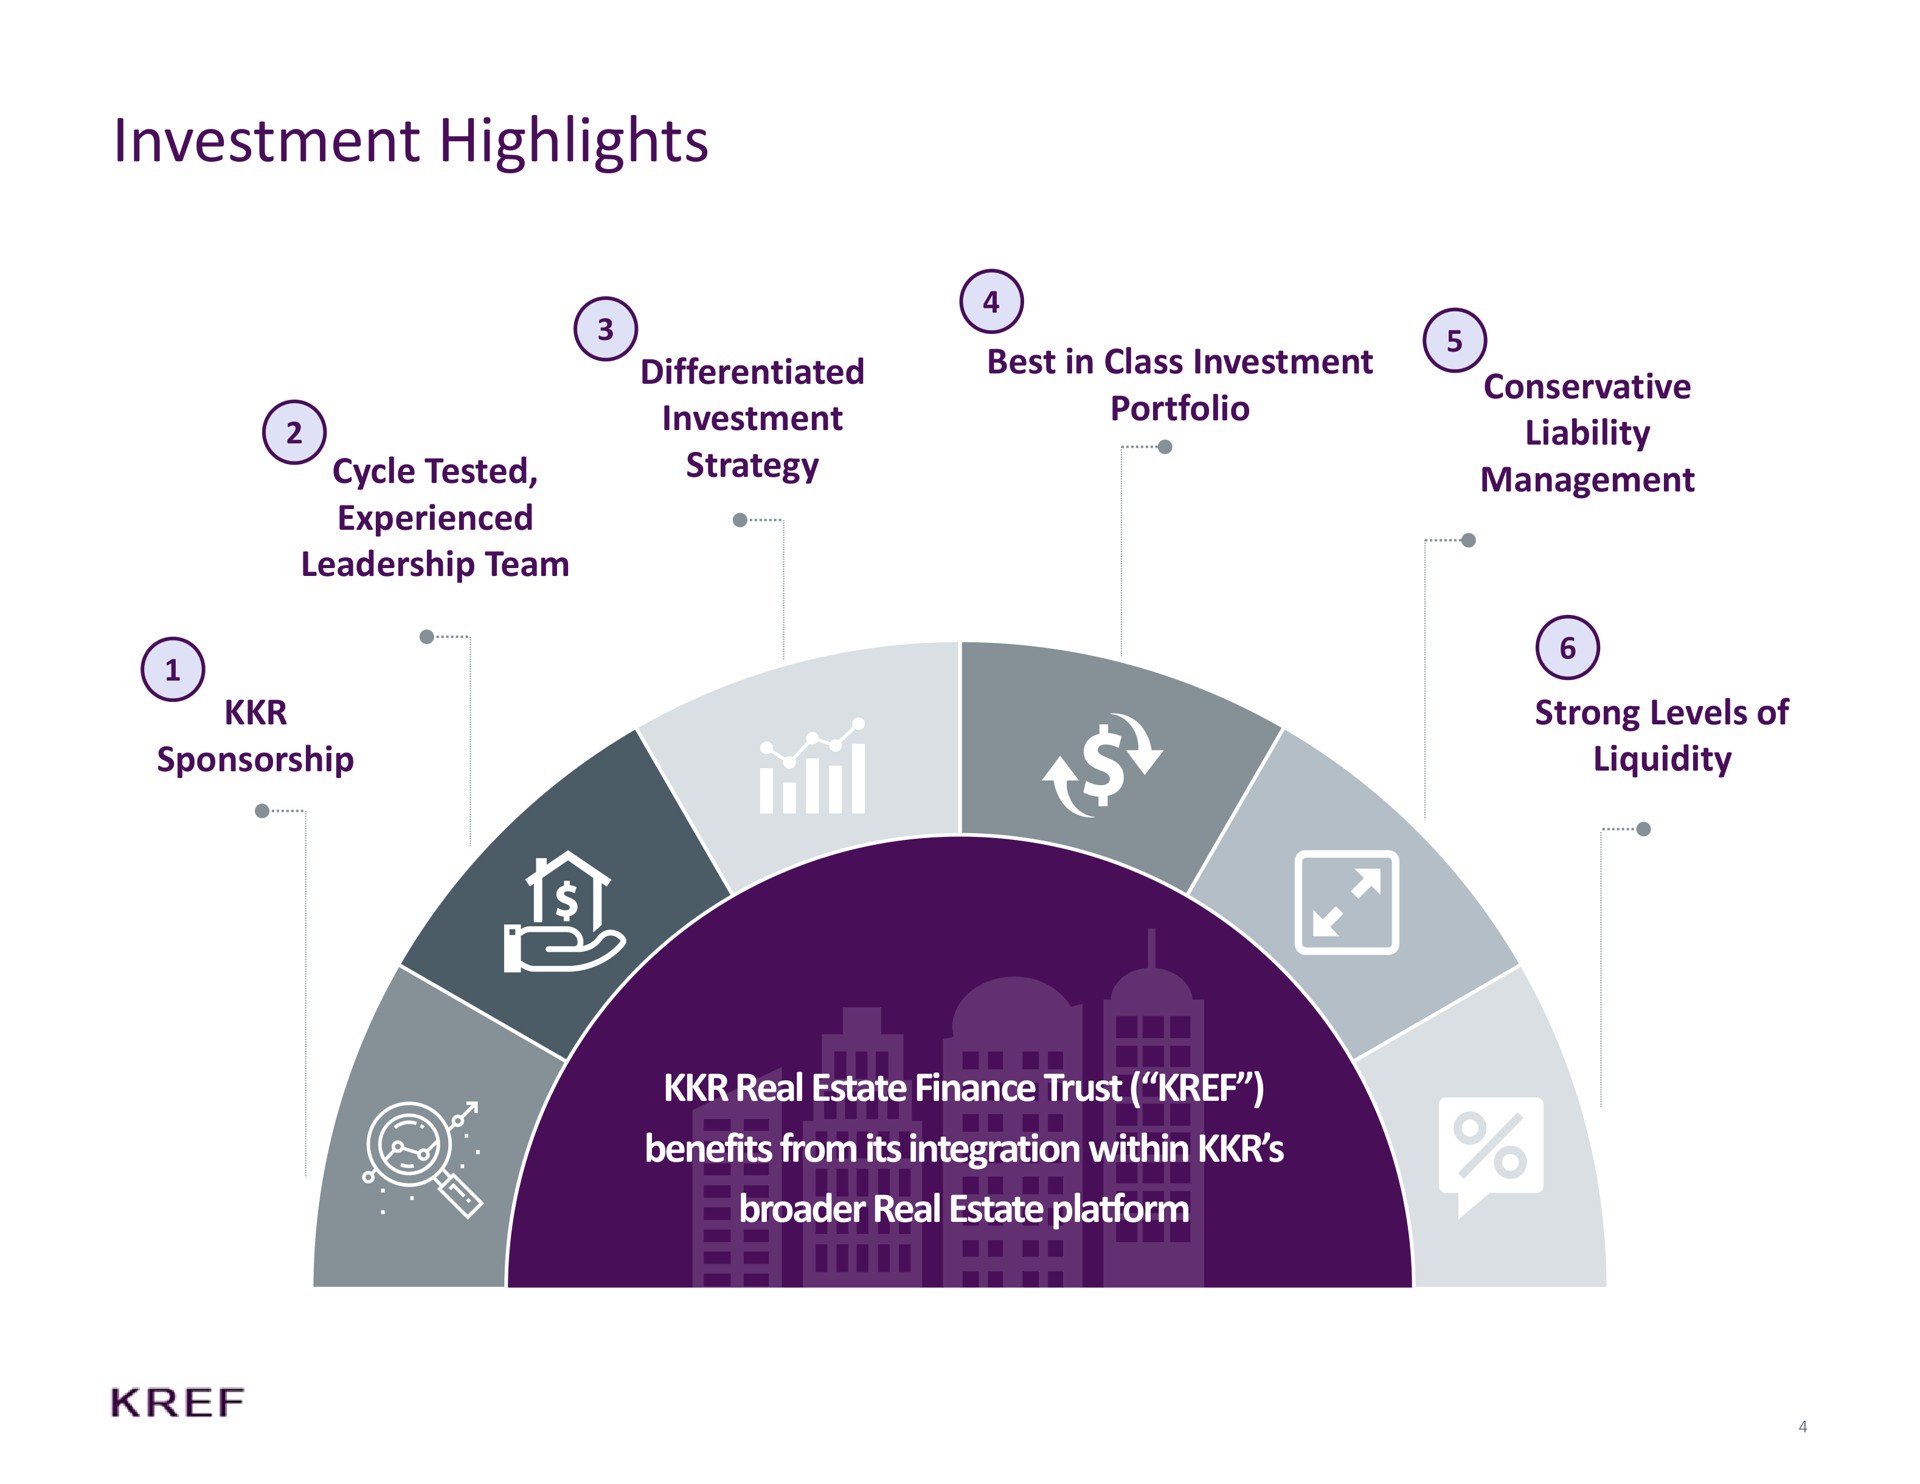 investment highlights cycle tested experienced leadership team sponsorship differentiated investment strategy best in class investment portfolio conservative liability management real estate finance trust benefits from its integration within real estate platform strong levels of liquidity eye | KKR Real Estate Finance Trust